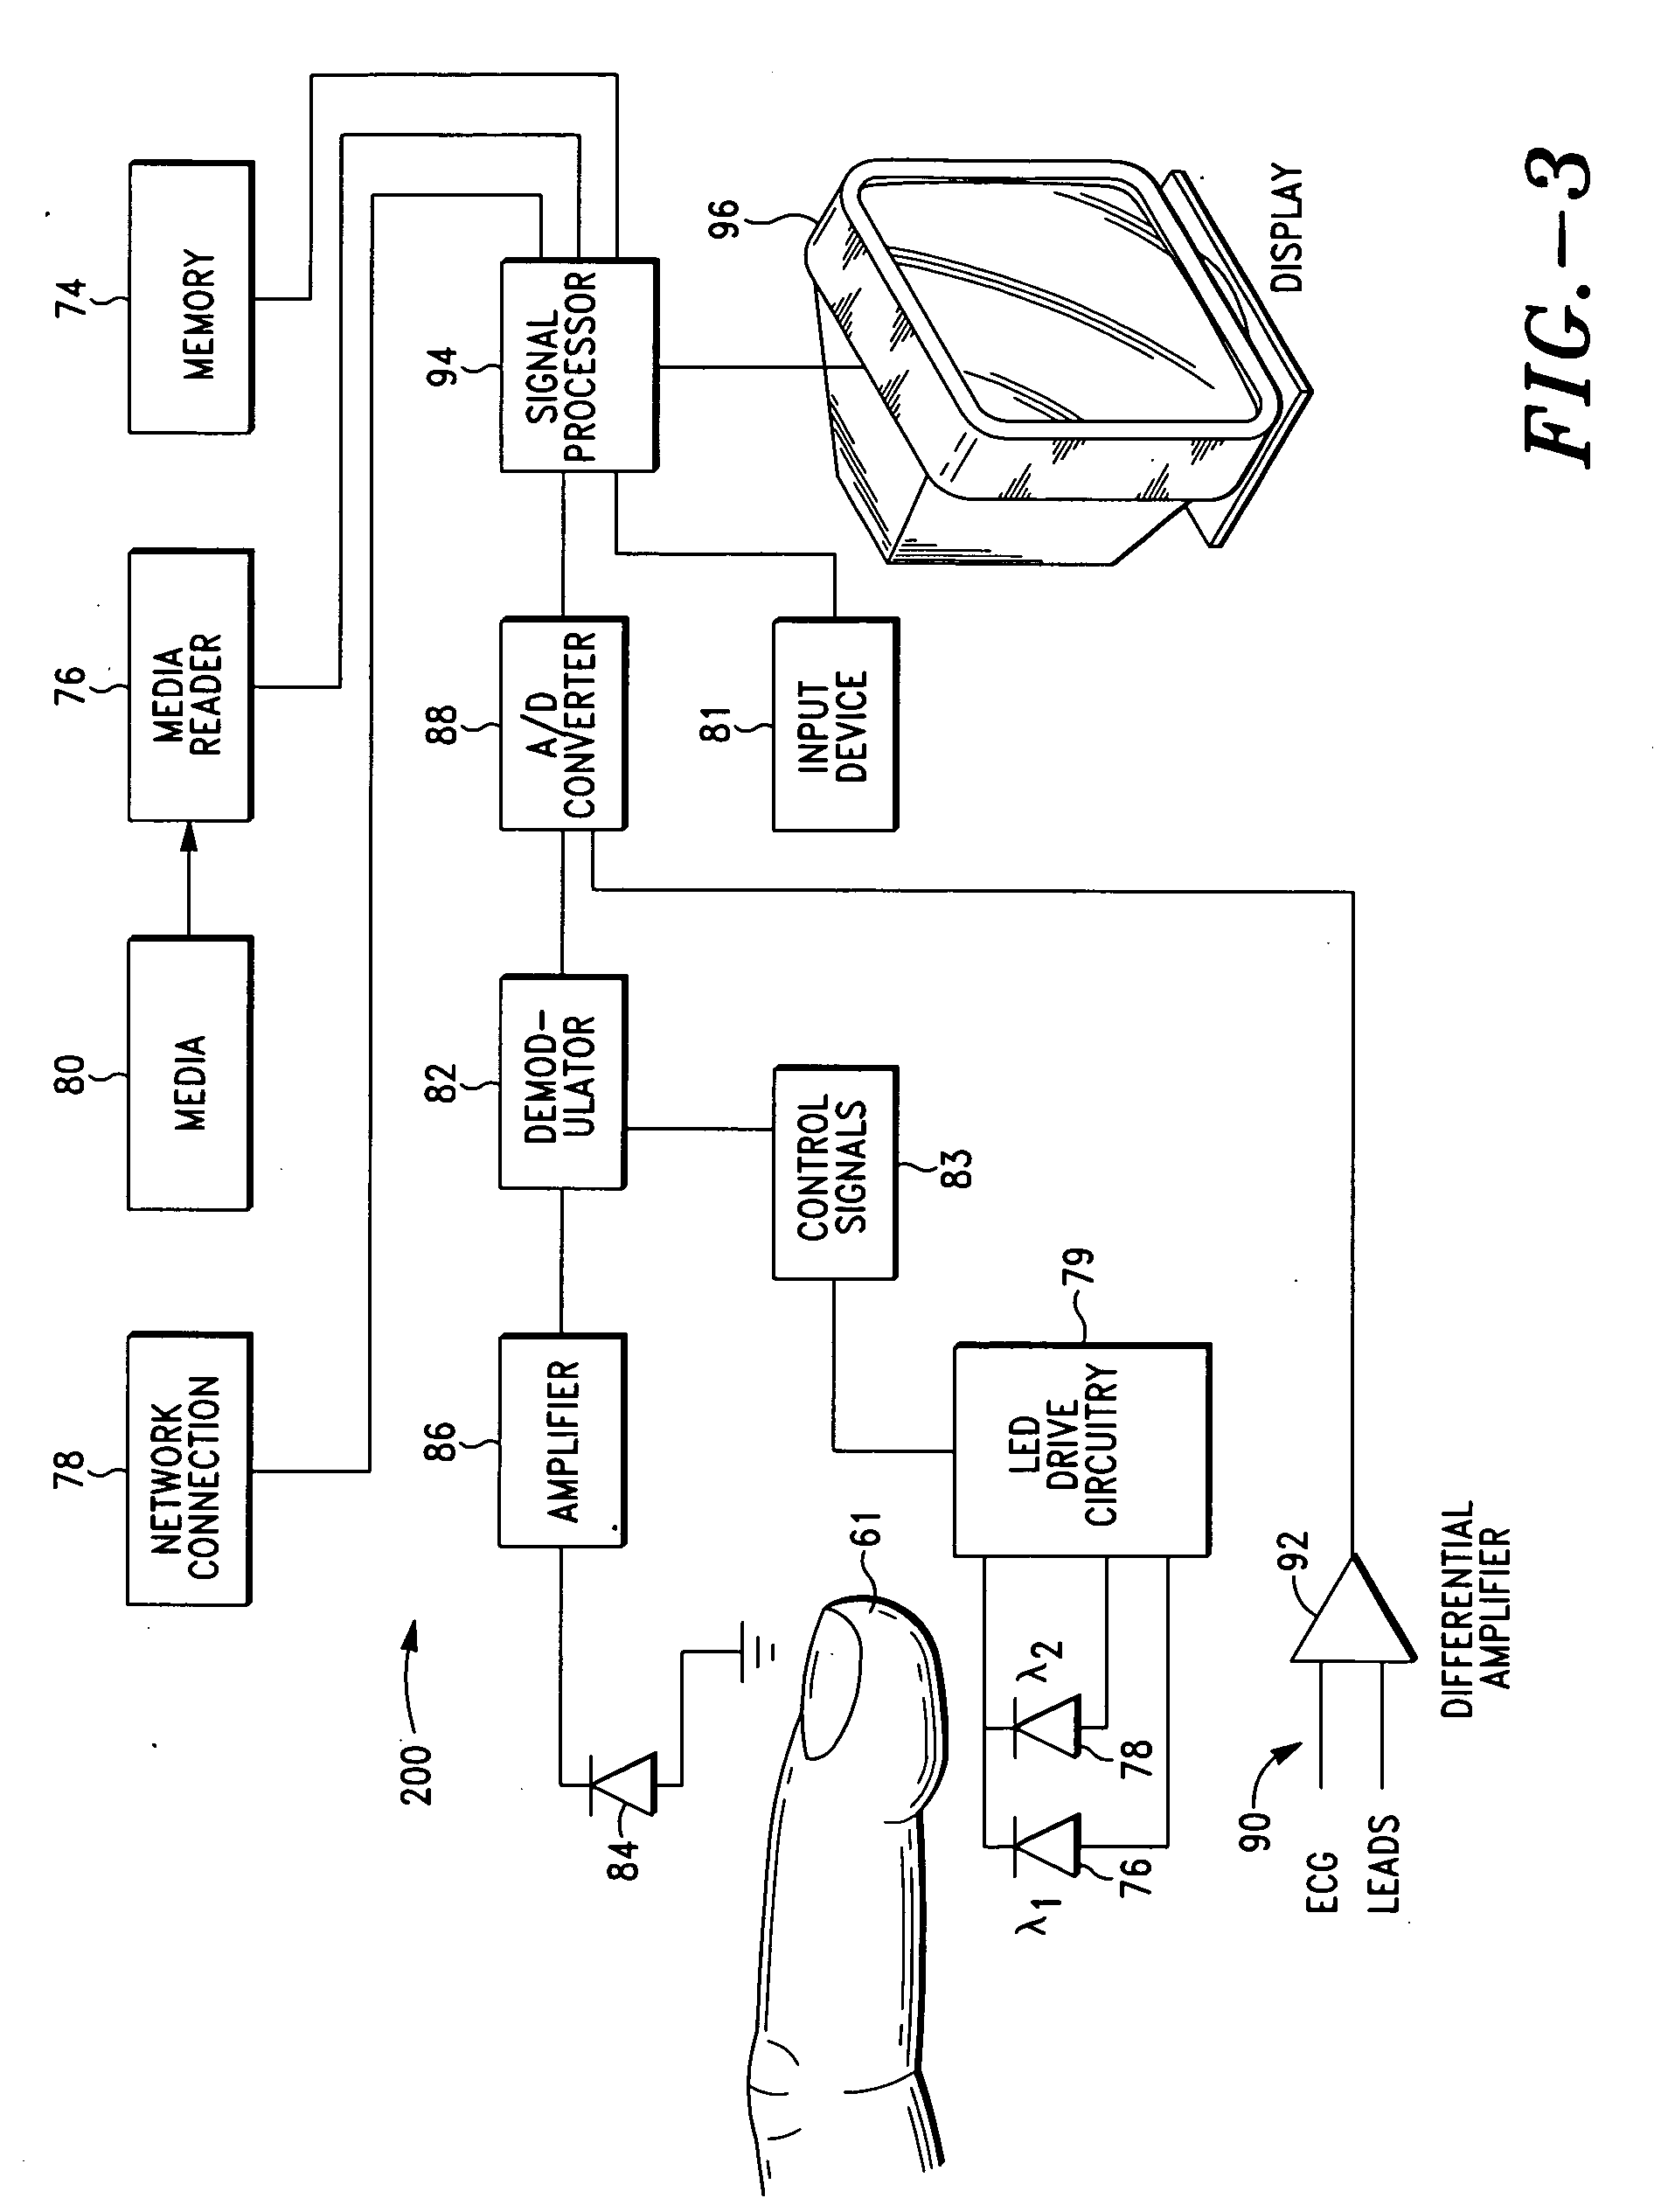 Method and system for determining cardiac function